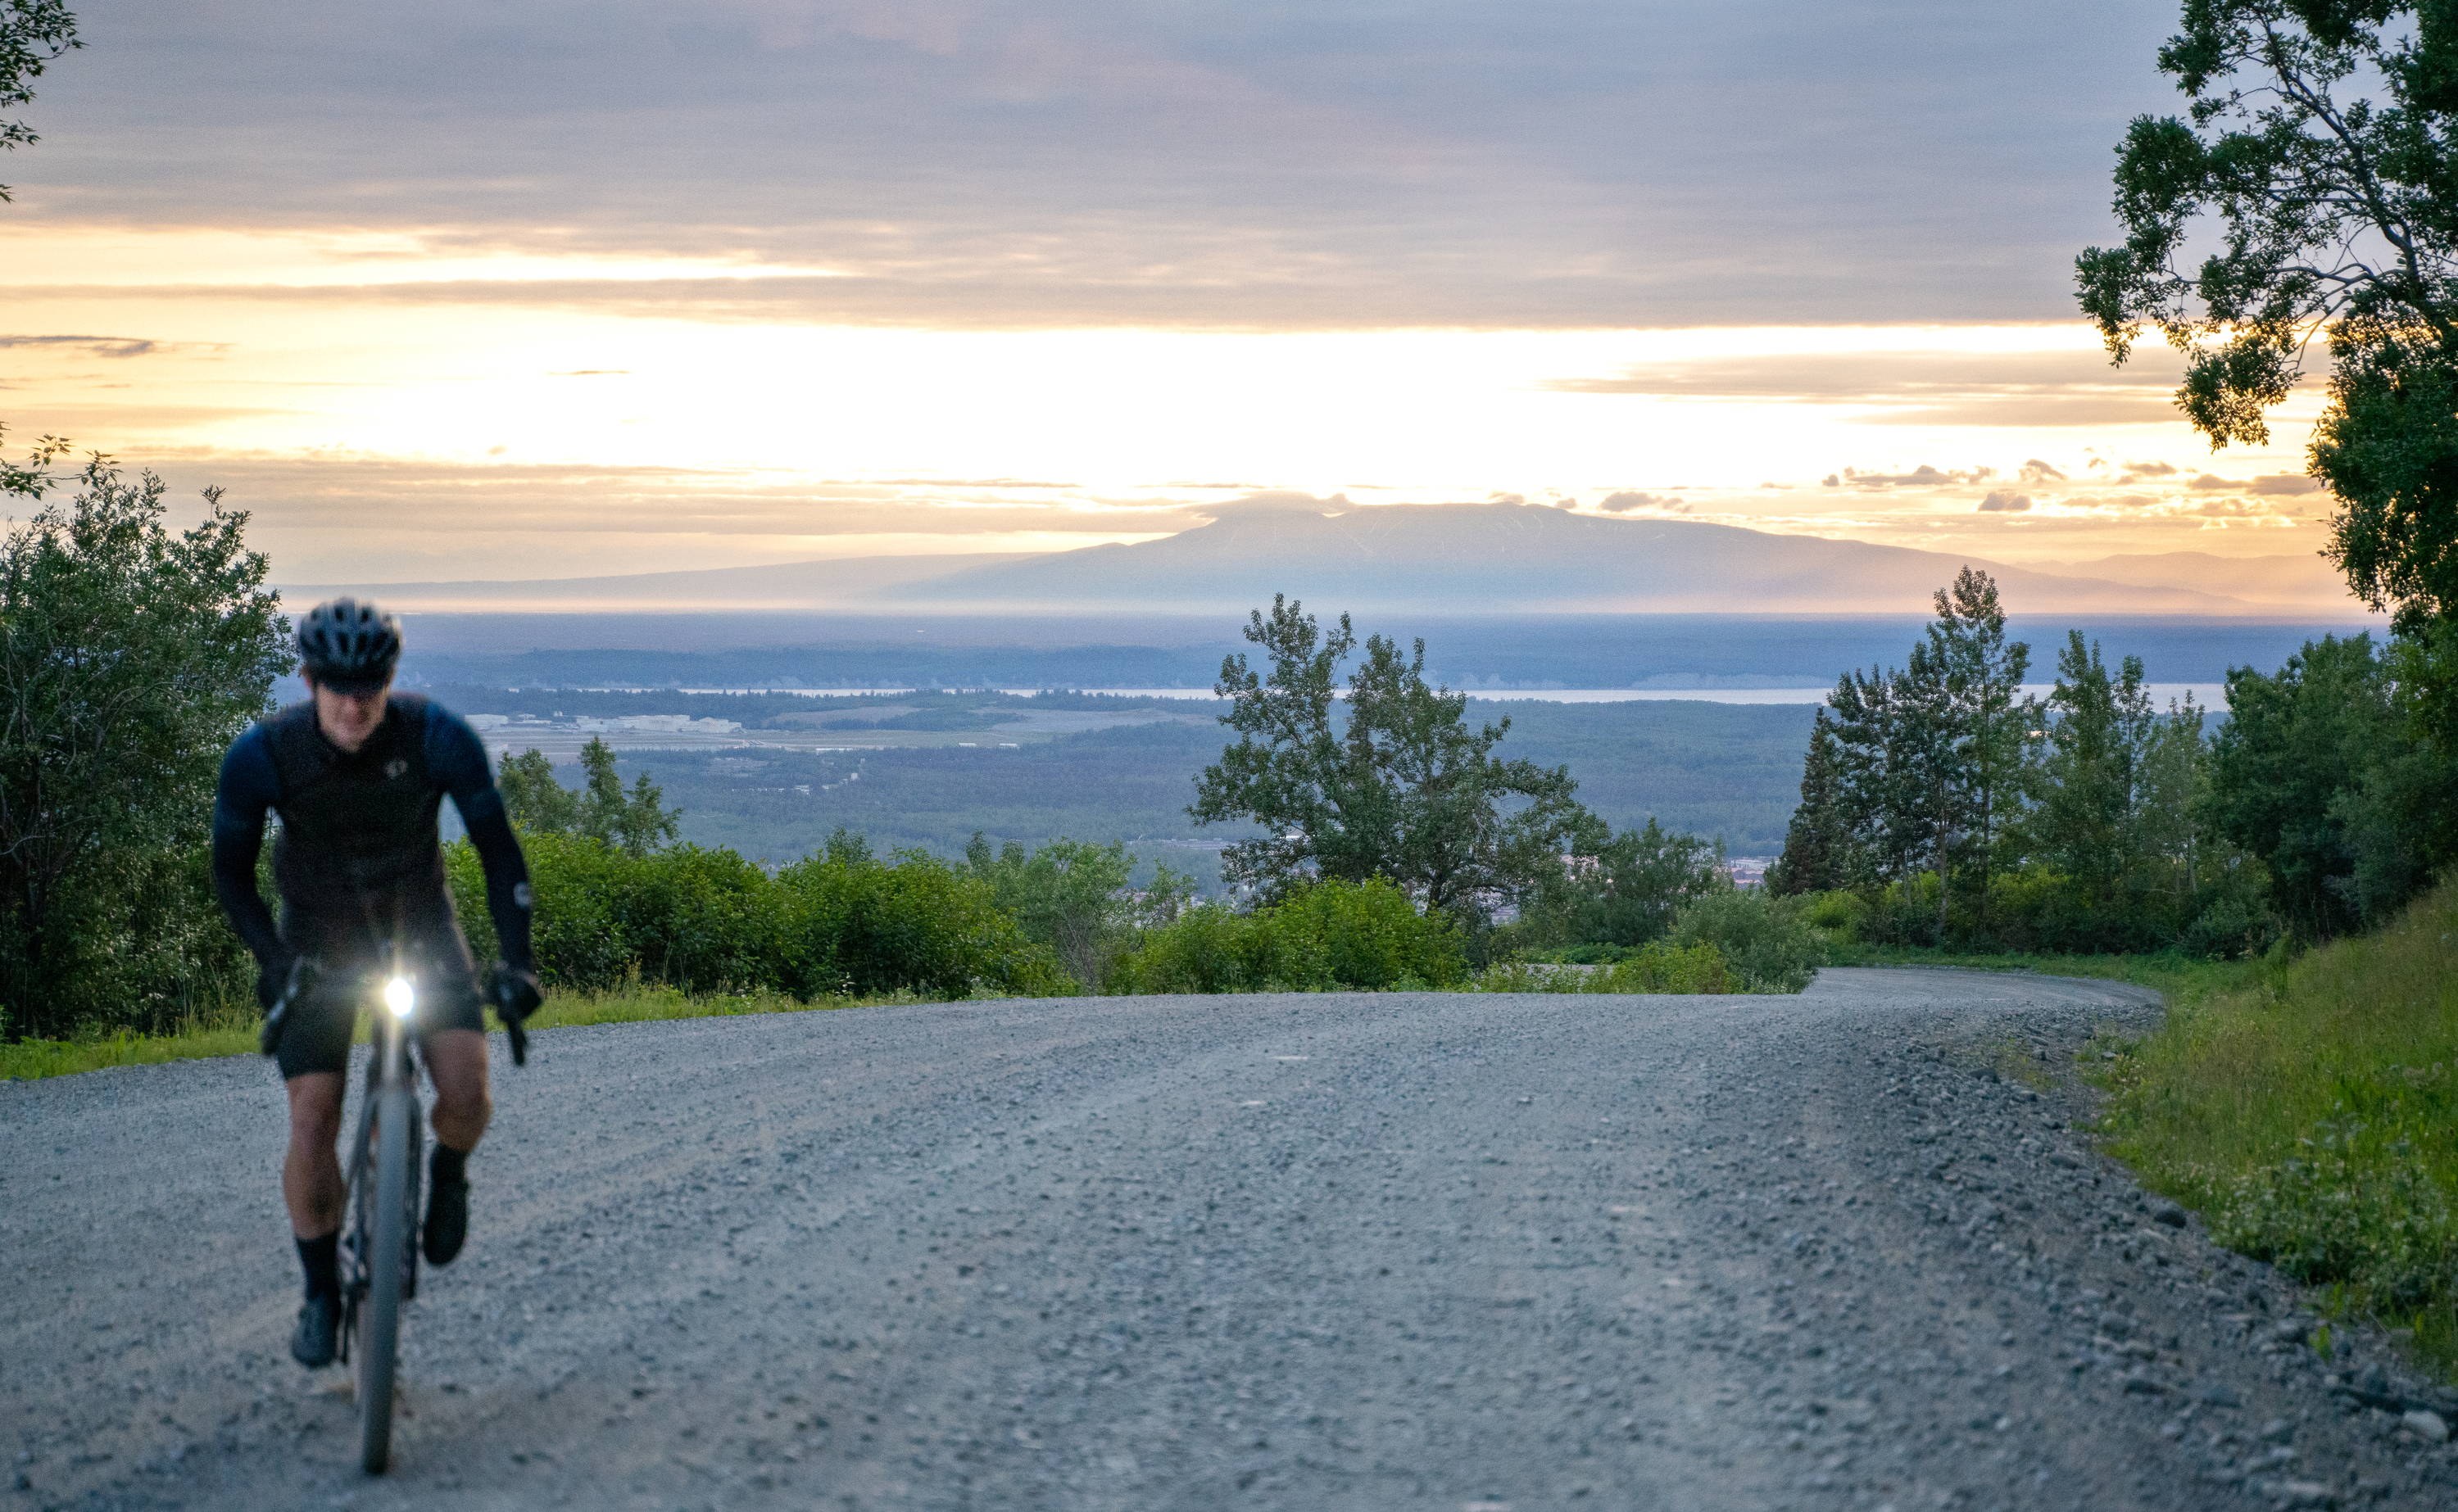 Dylan Morton charging up a gravel hill on his Otso Cycles bike. The gravel road curves off behind him, revealing a mountainous sunset.